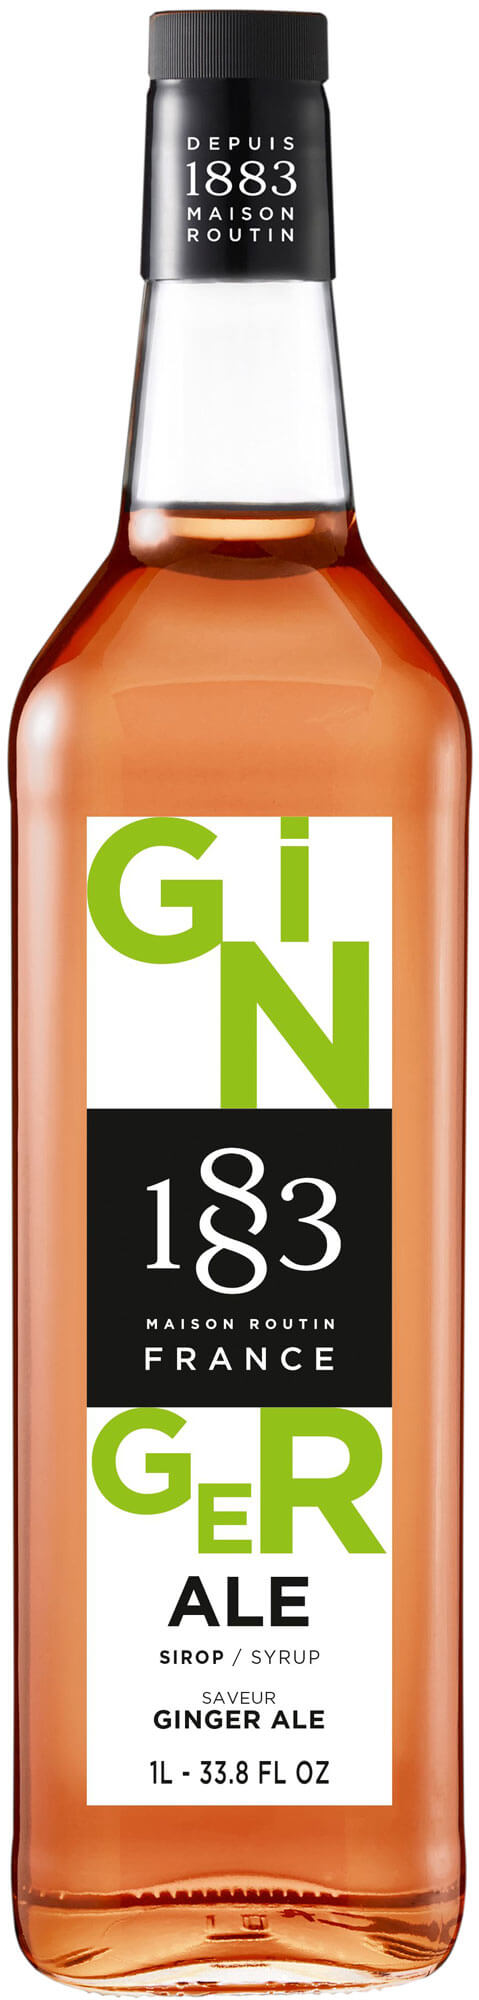 Ginger Ale - Maison Routin 1883 Sirup (1,0l)